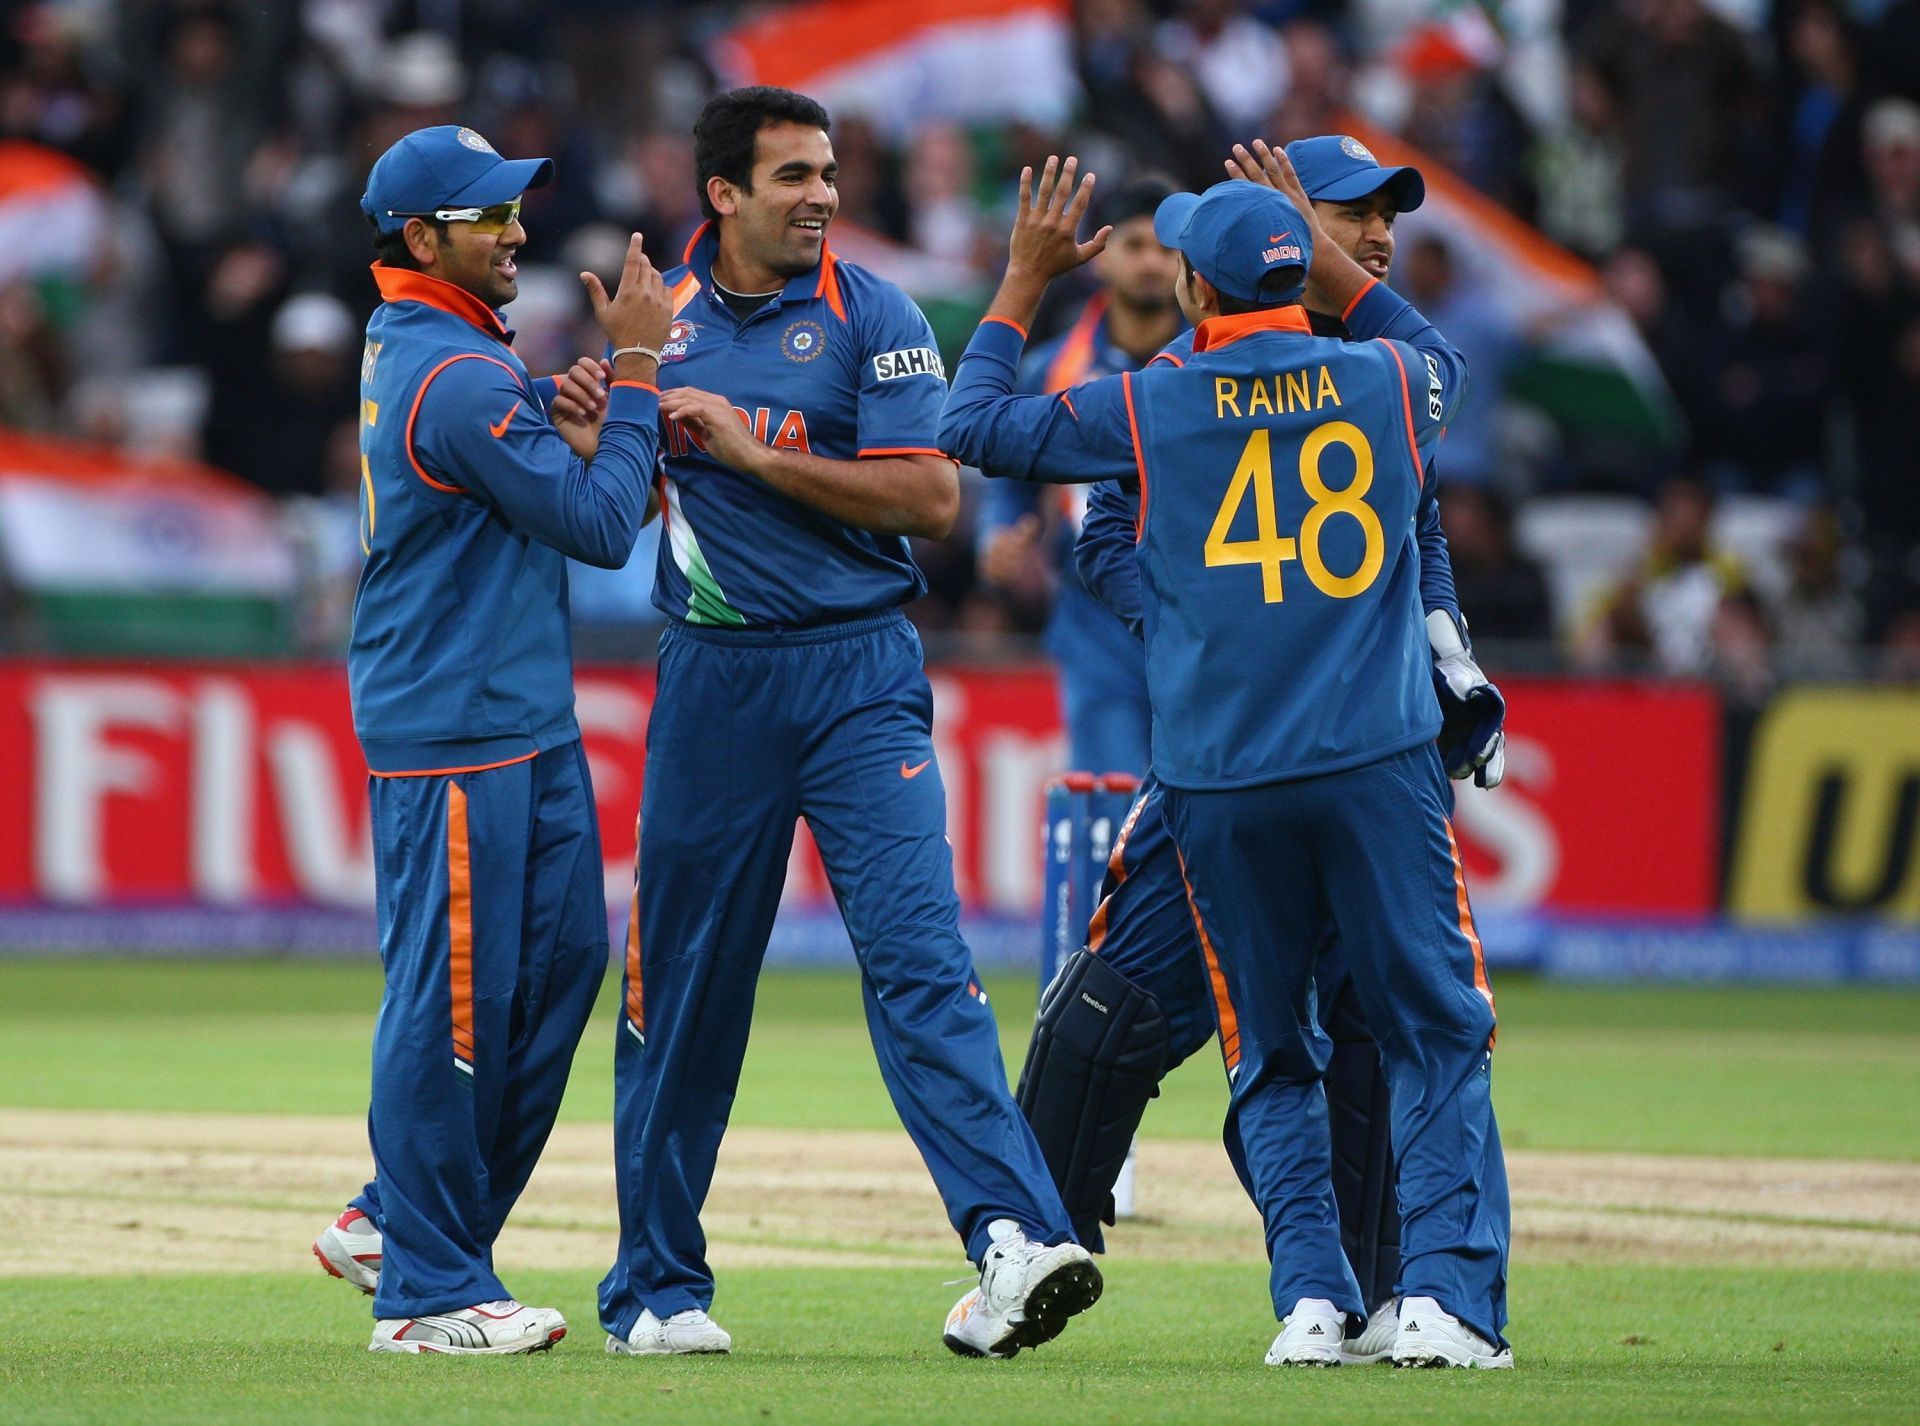 Zaheer Khan celebrates a wicket with teammates during the 2009 T20 World Cup match against Ireland. (Image Credit: Getty Images)